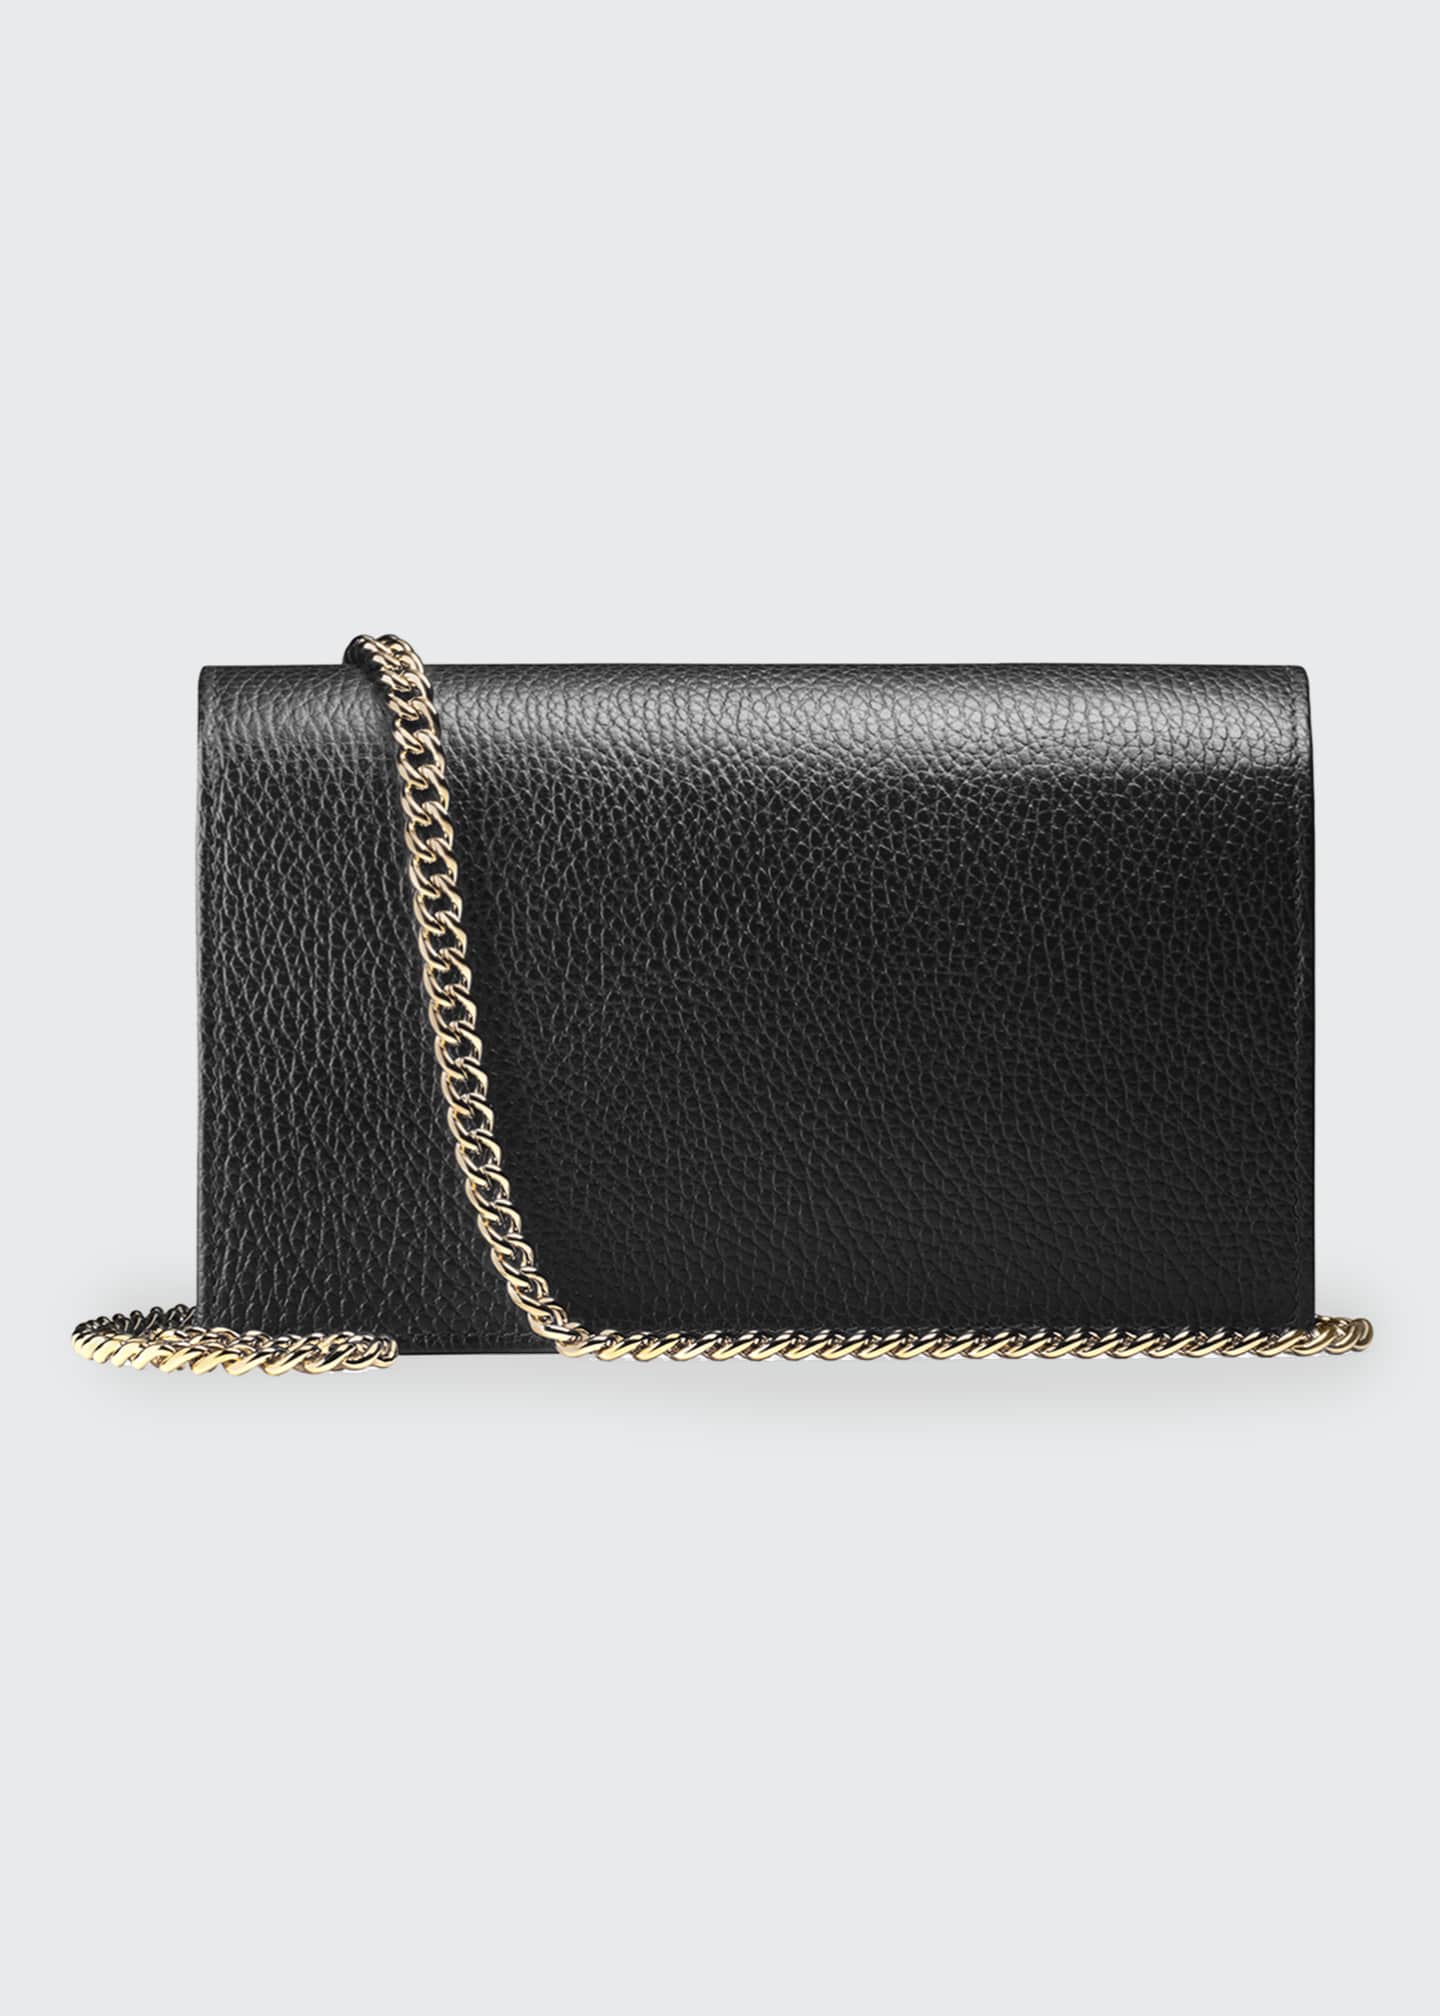 Gucci GG Marmont Leather Flap Wallet on a Chain - Bergdorf Goodman